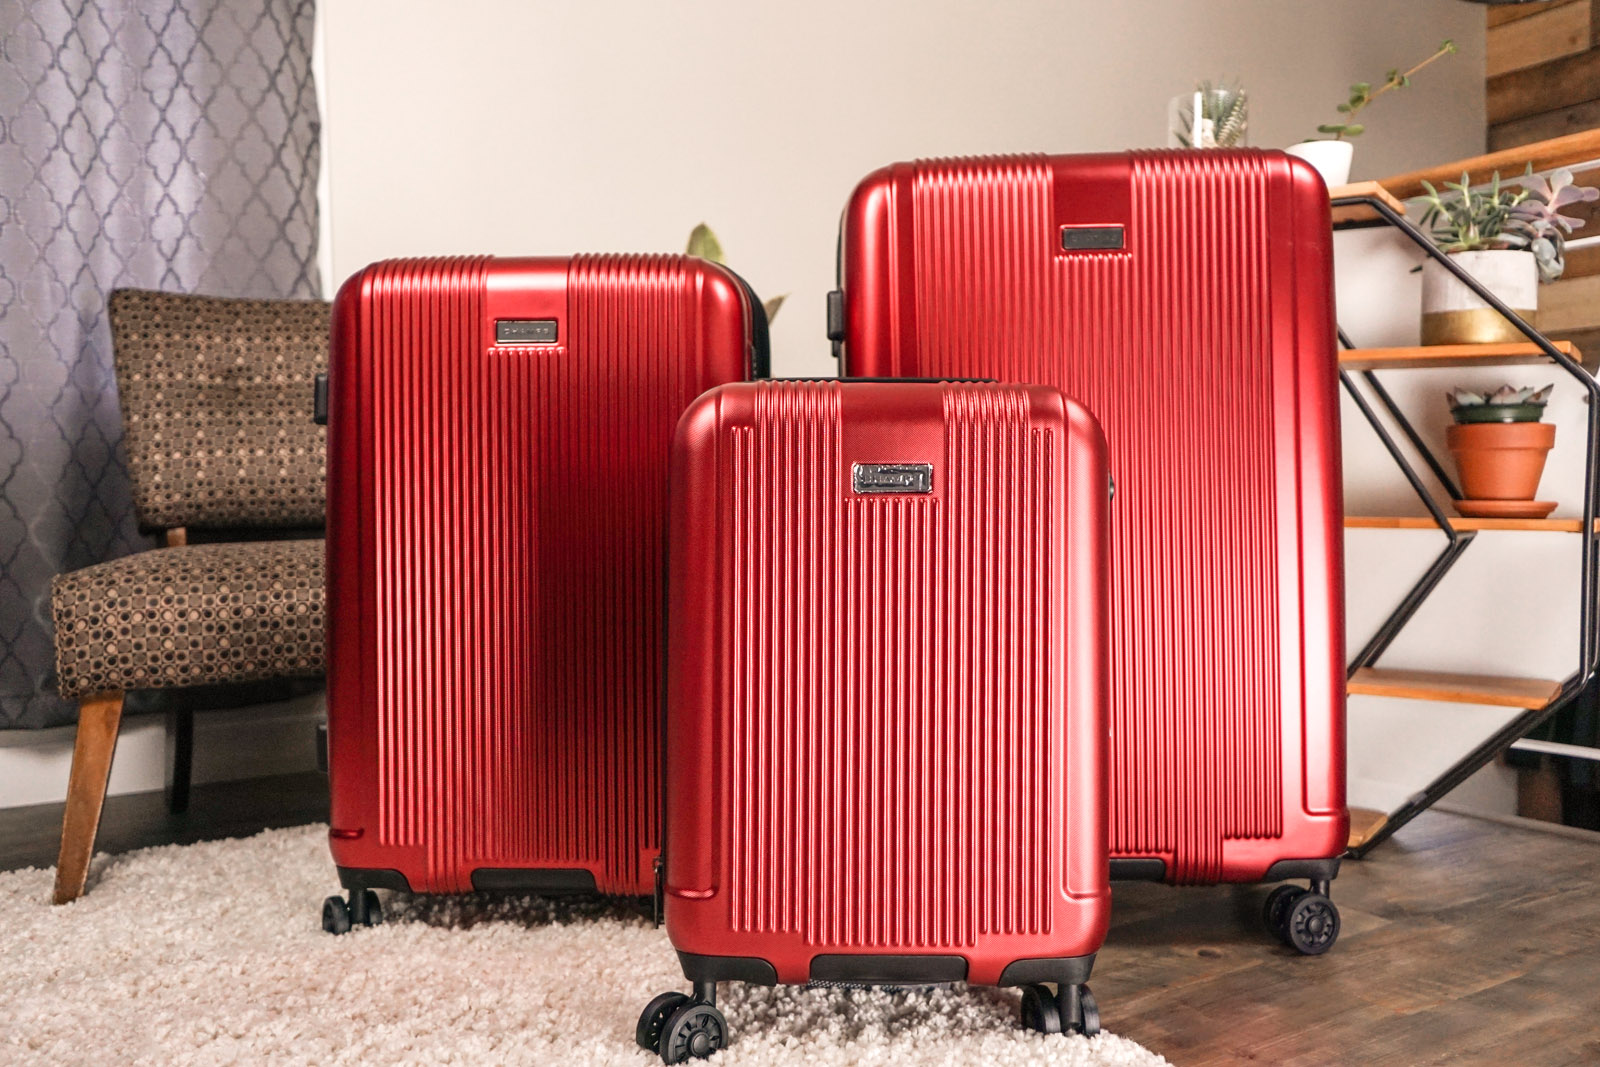 Champs Marquis luggage set review